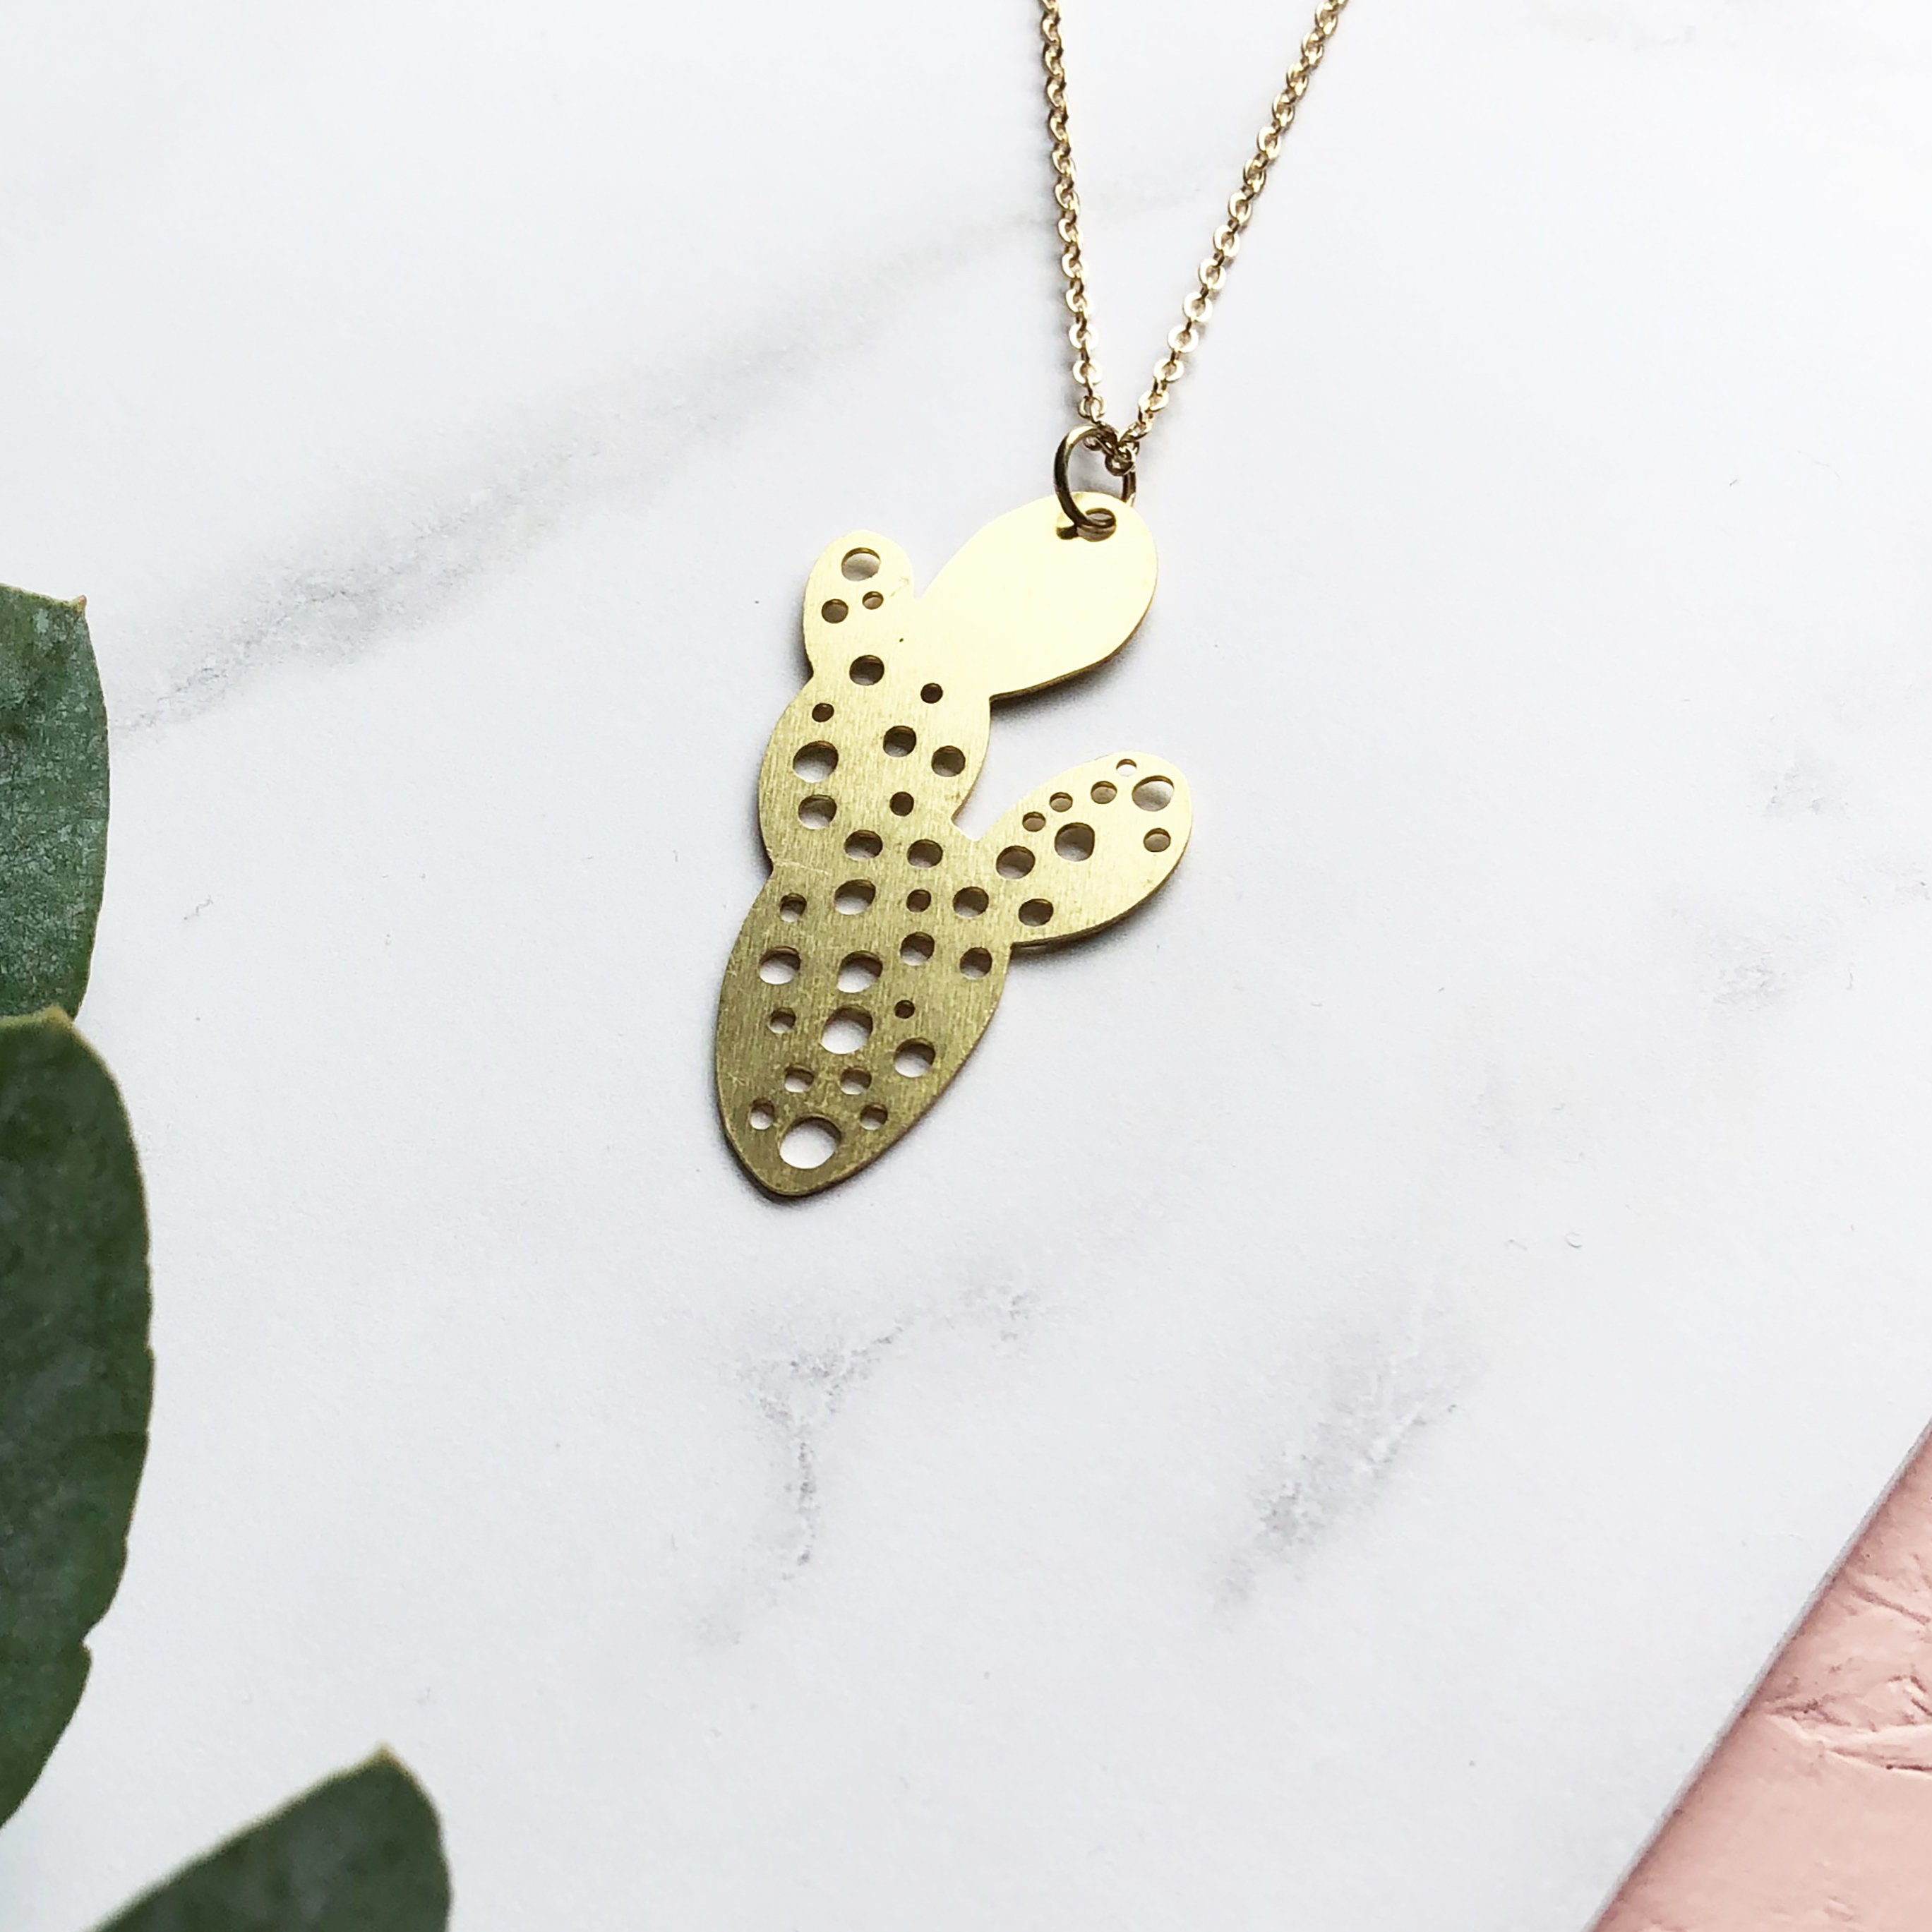 Gold Cactus Necklace - Jewellery Tropical Pendant House Plant Gift Fashion Accessory